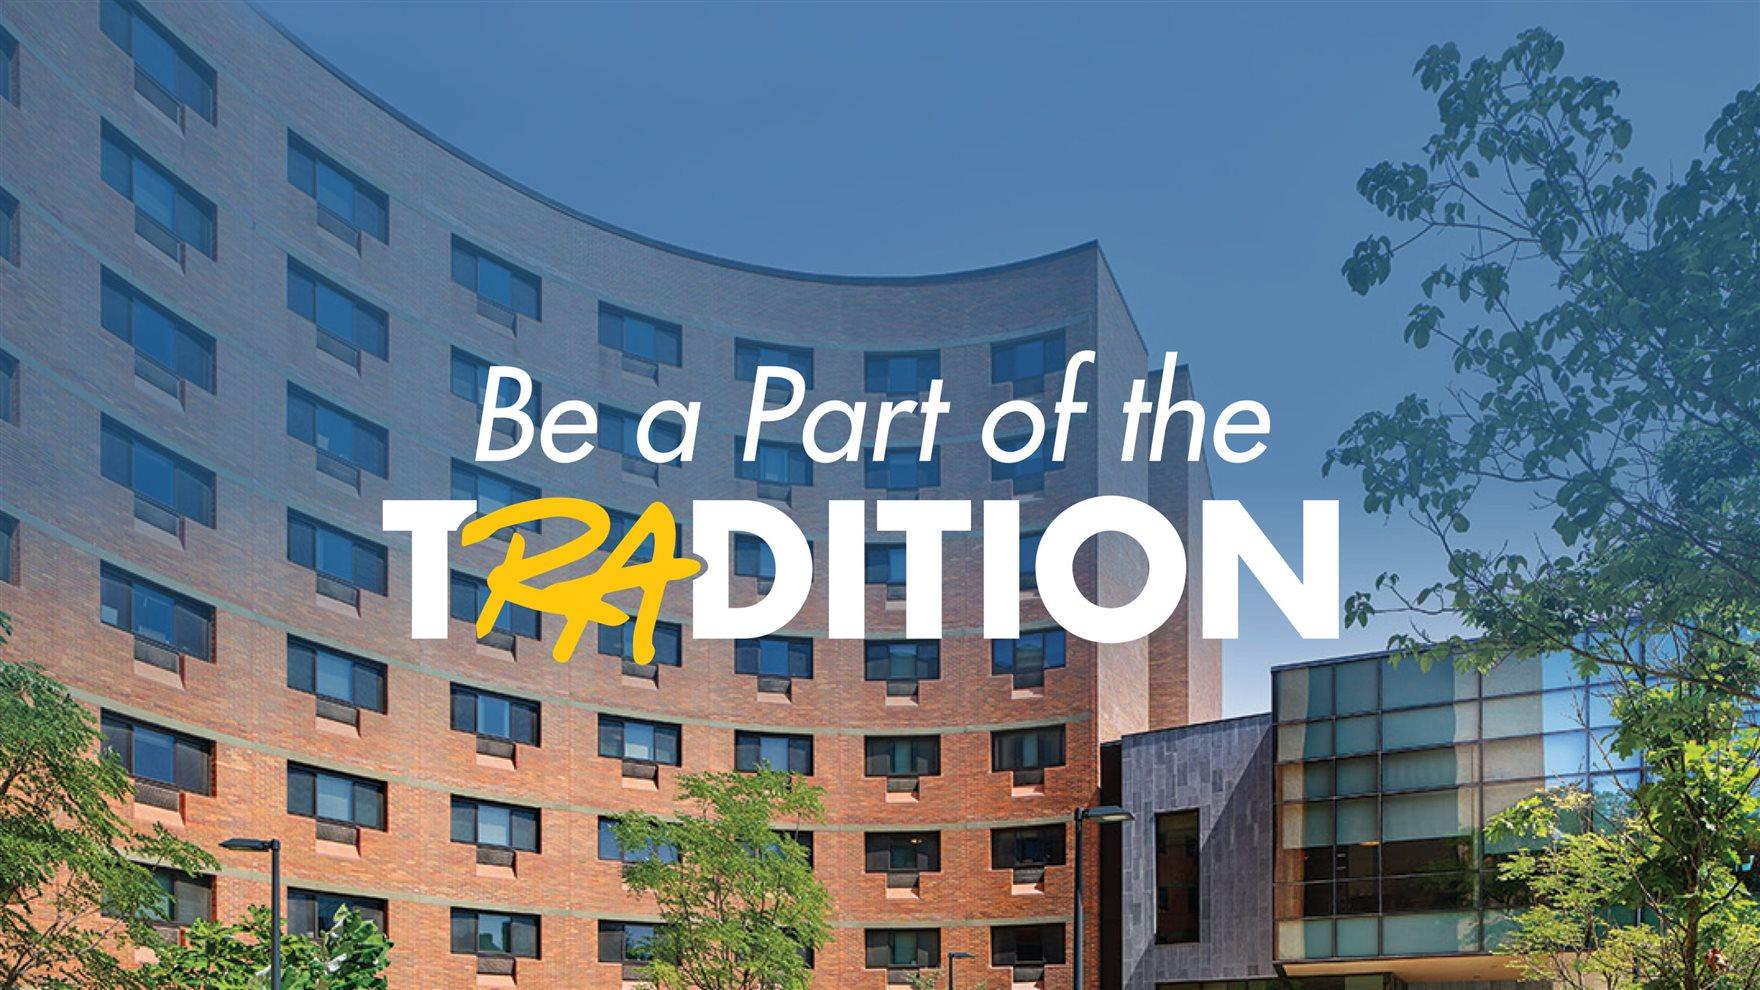 Resident Assistants – Be a part of the tradition